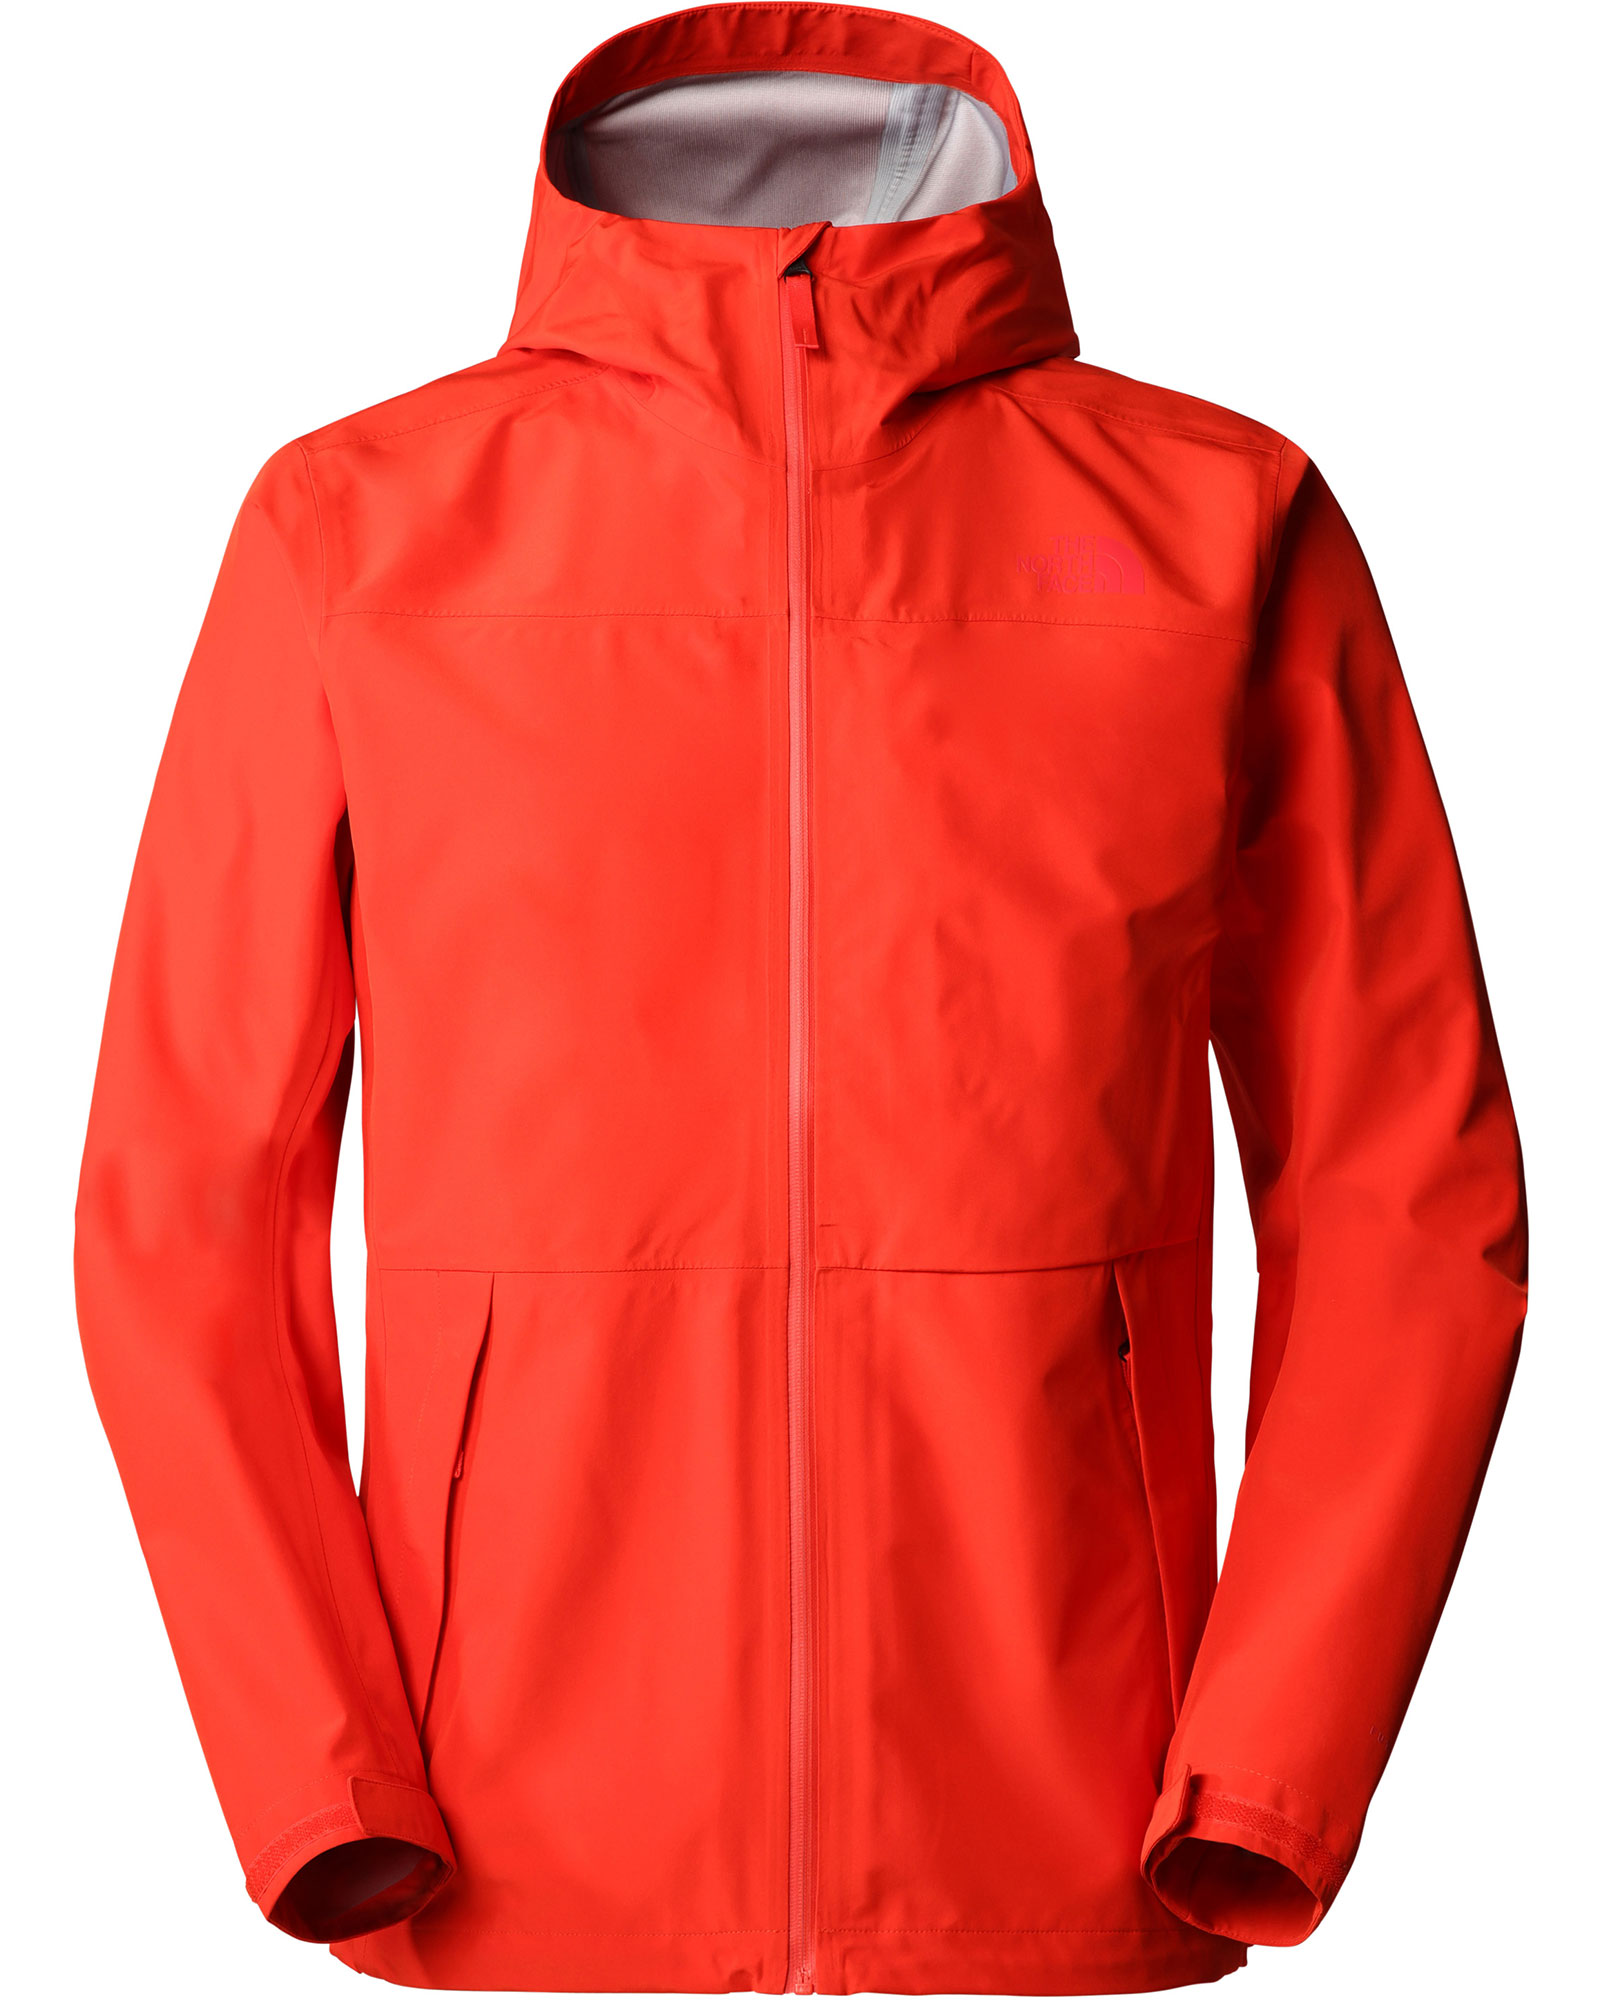 The North Face Dryzzle FUTURELIGHT Men’s Jacket - Fiery Red L